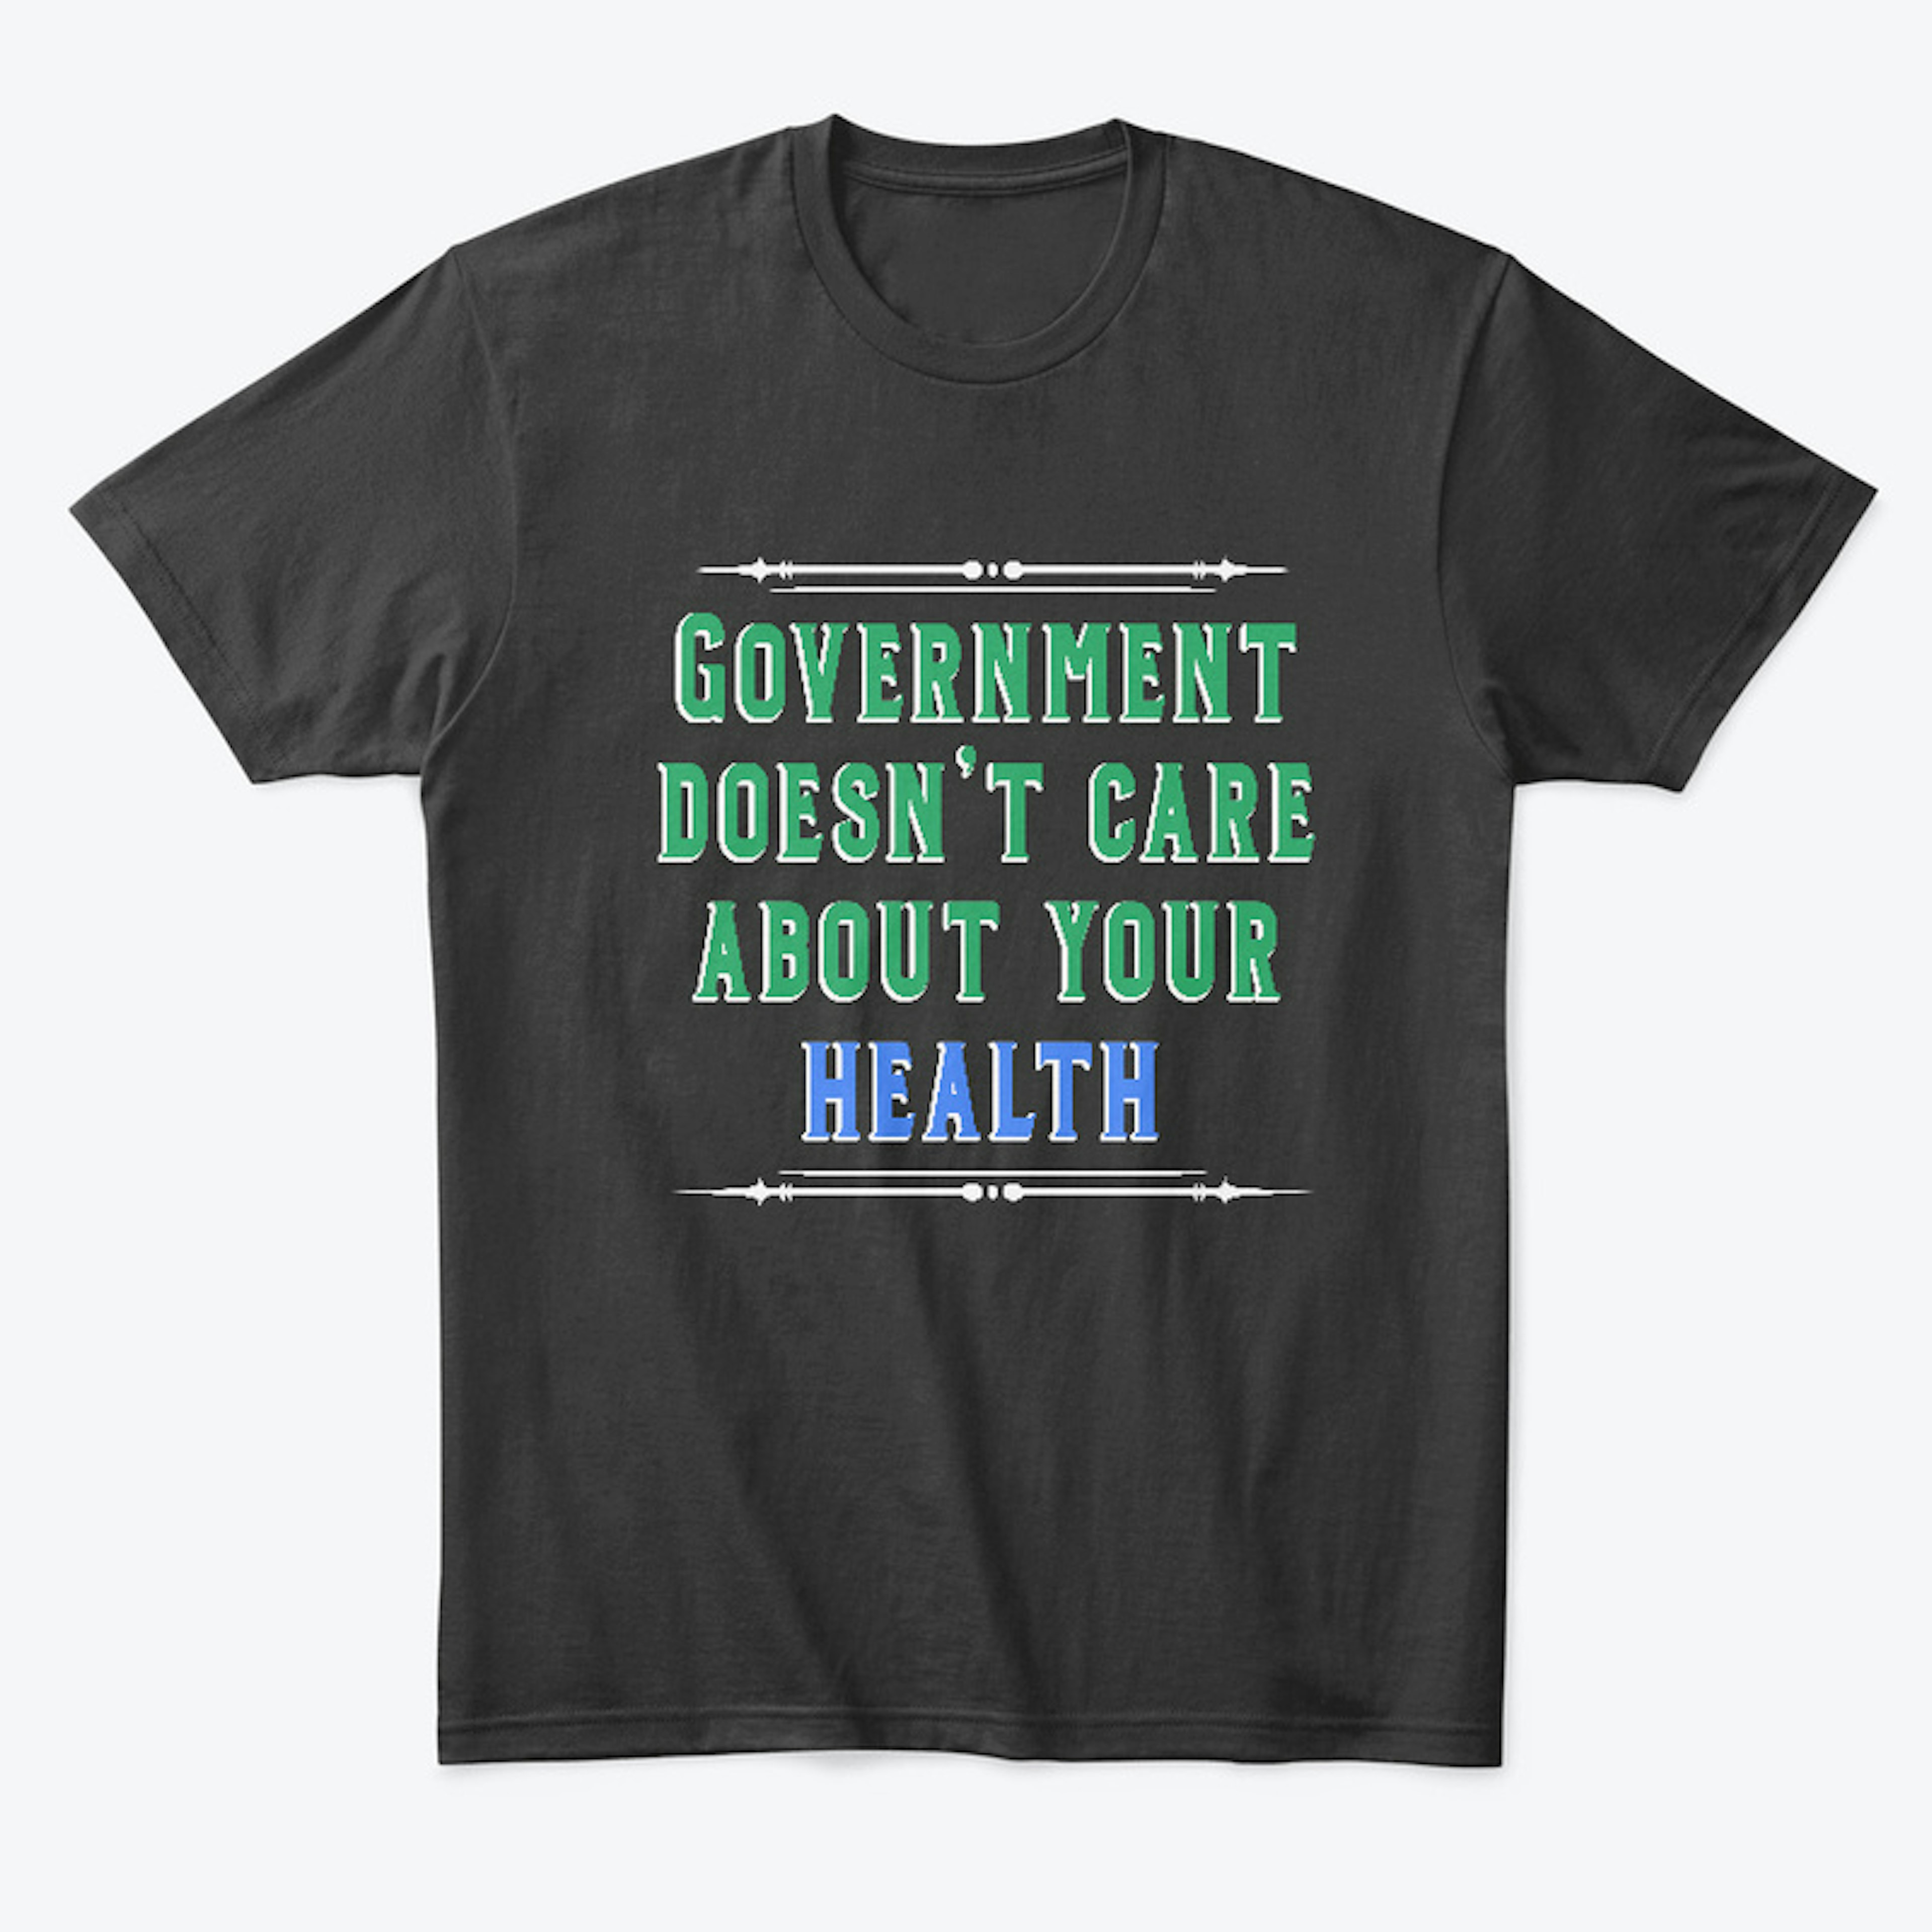 Who Cares About Your Health? (Black)